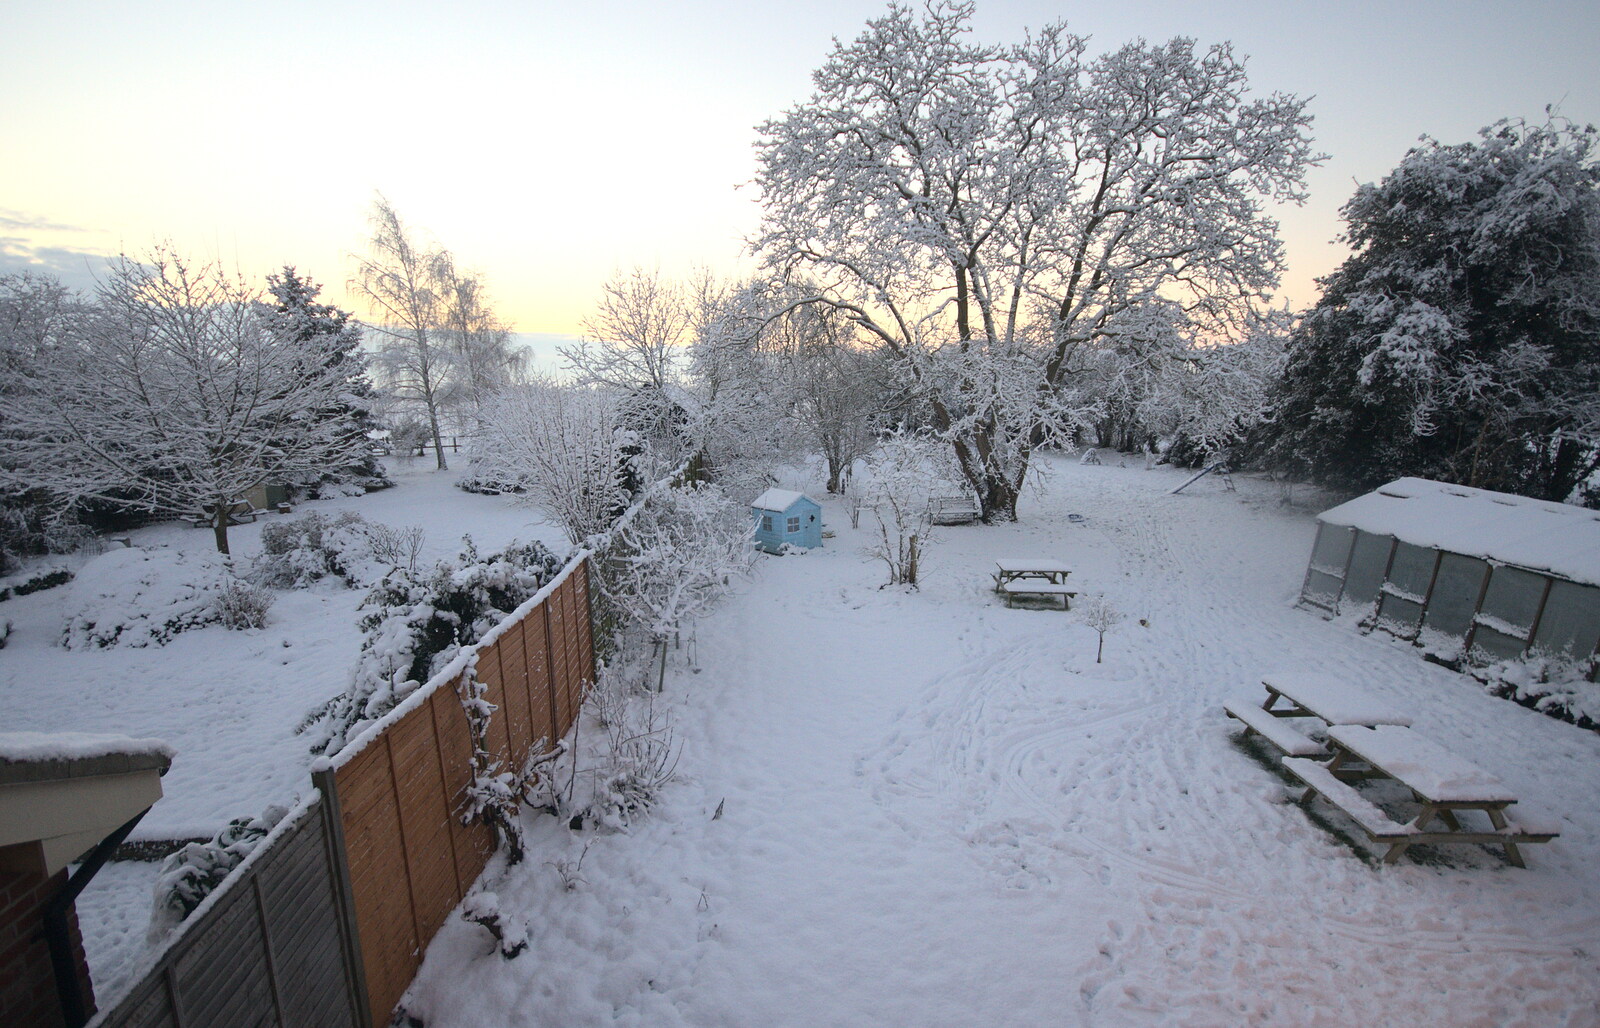 More Snow Days and a Wind Turbine is Built, Brome, Suffolk - 19th January 2013: The view from the bedroom